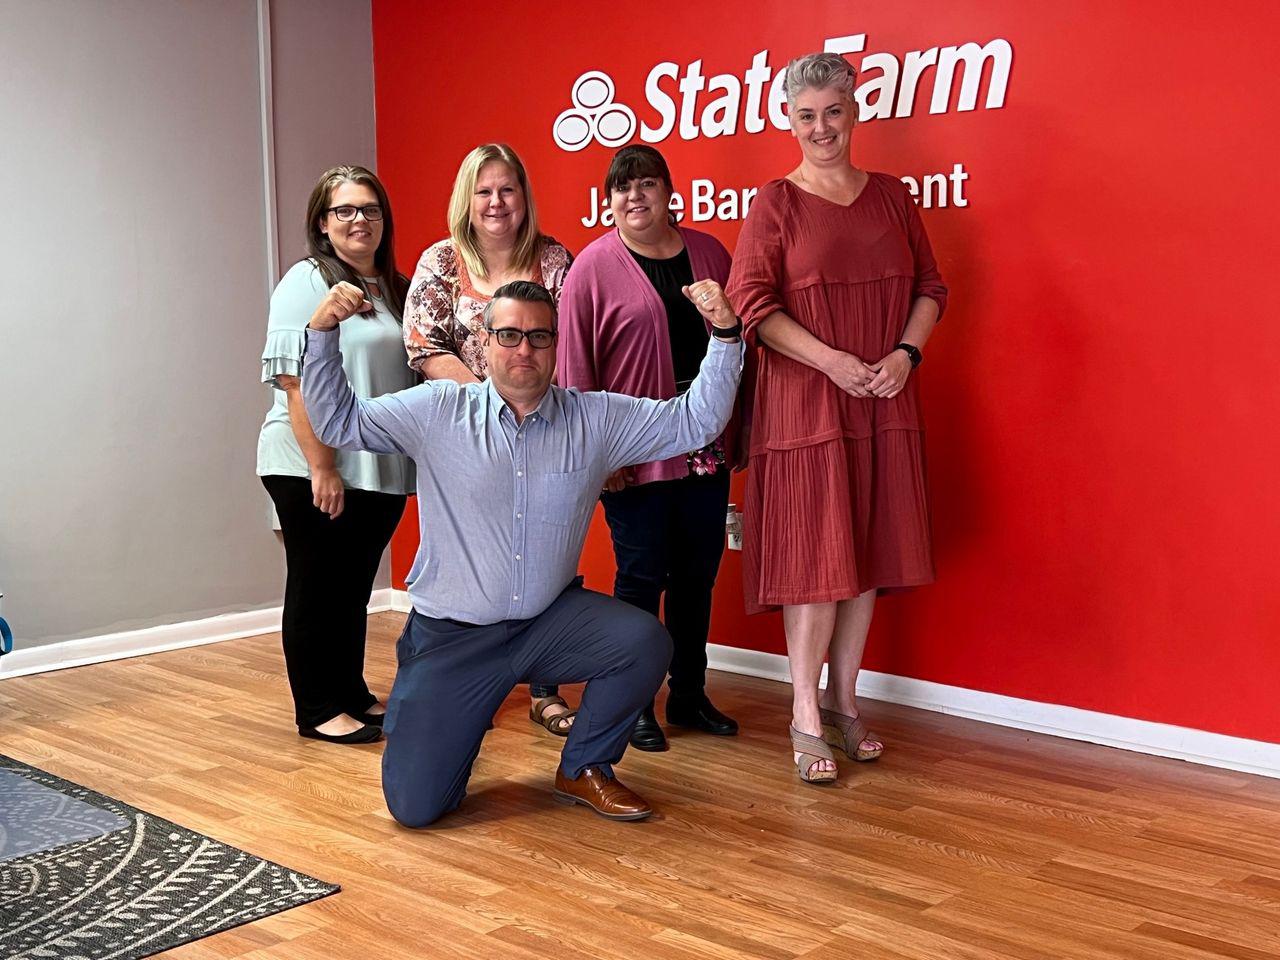 Happy Employee Appreciation Day to these ladies and pup.  They are funny, smart and do a great job o Jamie Barger - State Farm Insurance Agent Abingdon (276)676-1150